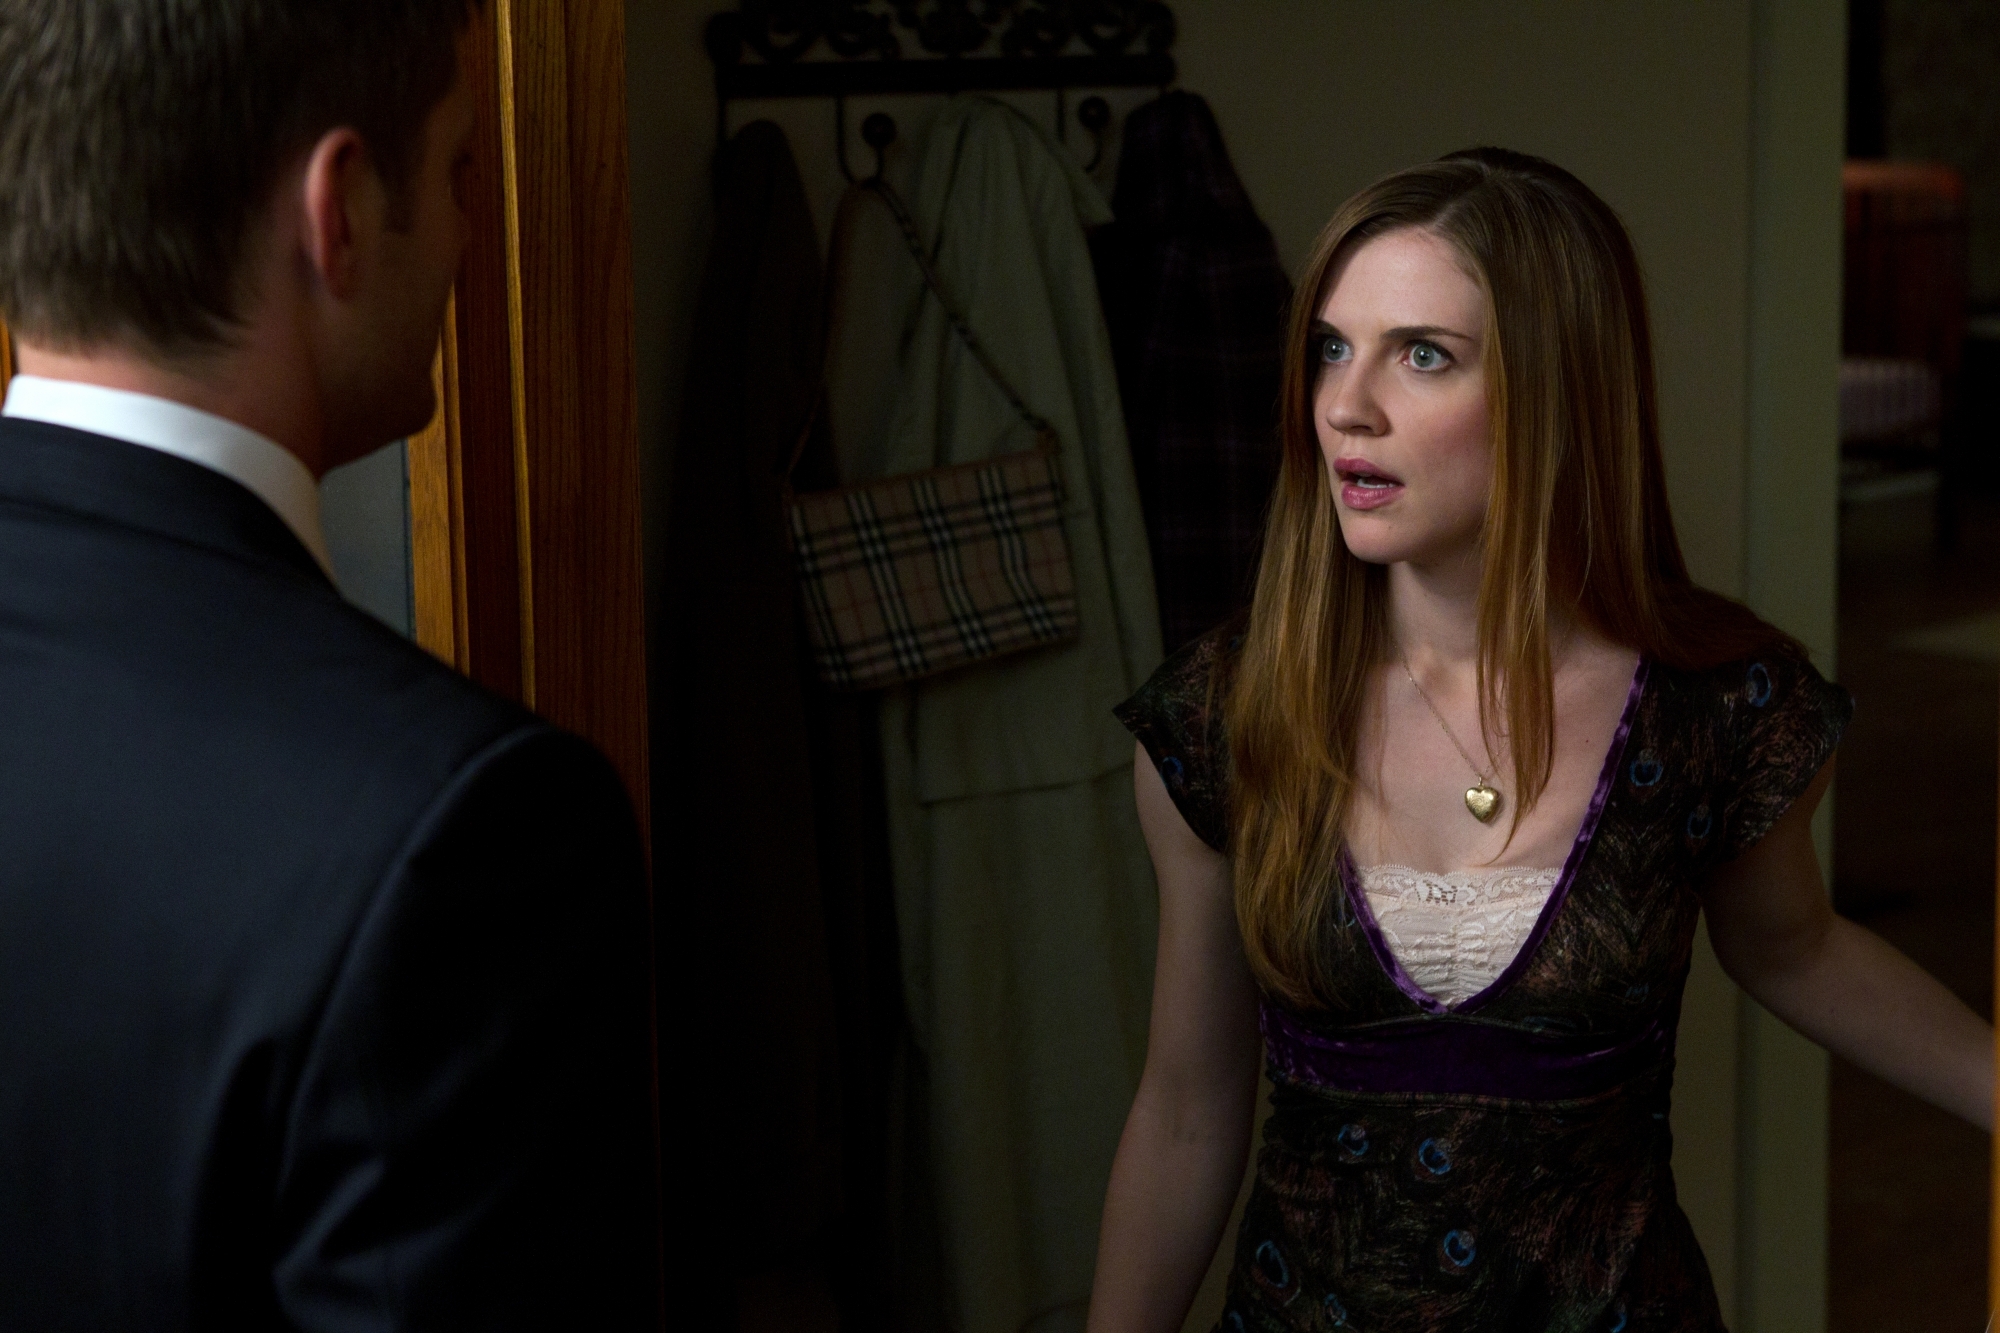 Still of Jensen Ackles and Sara Canning in Supernatural (2005)